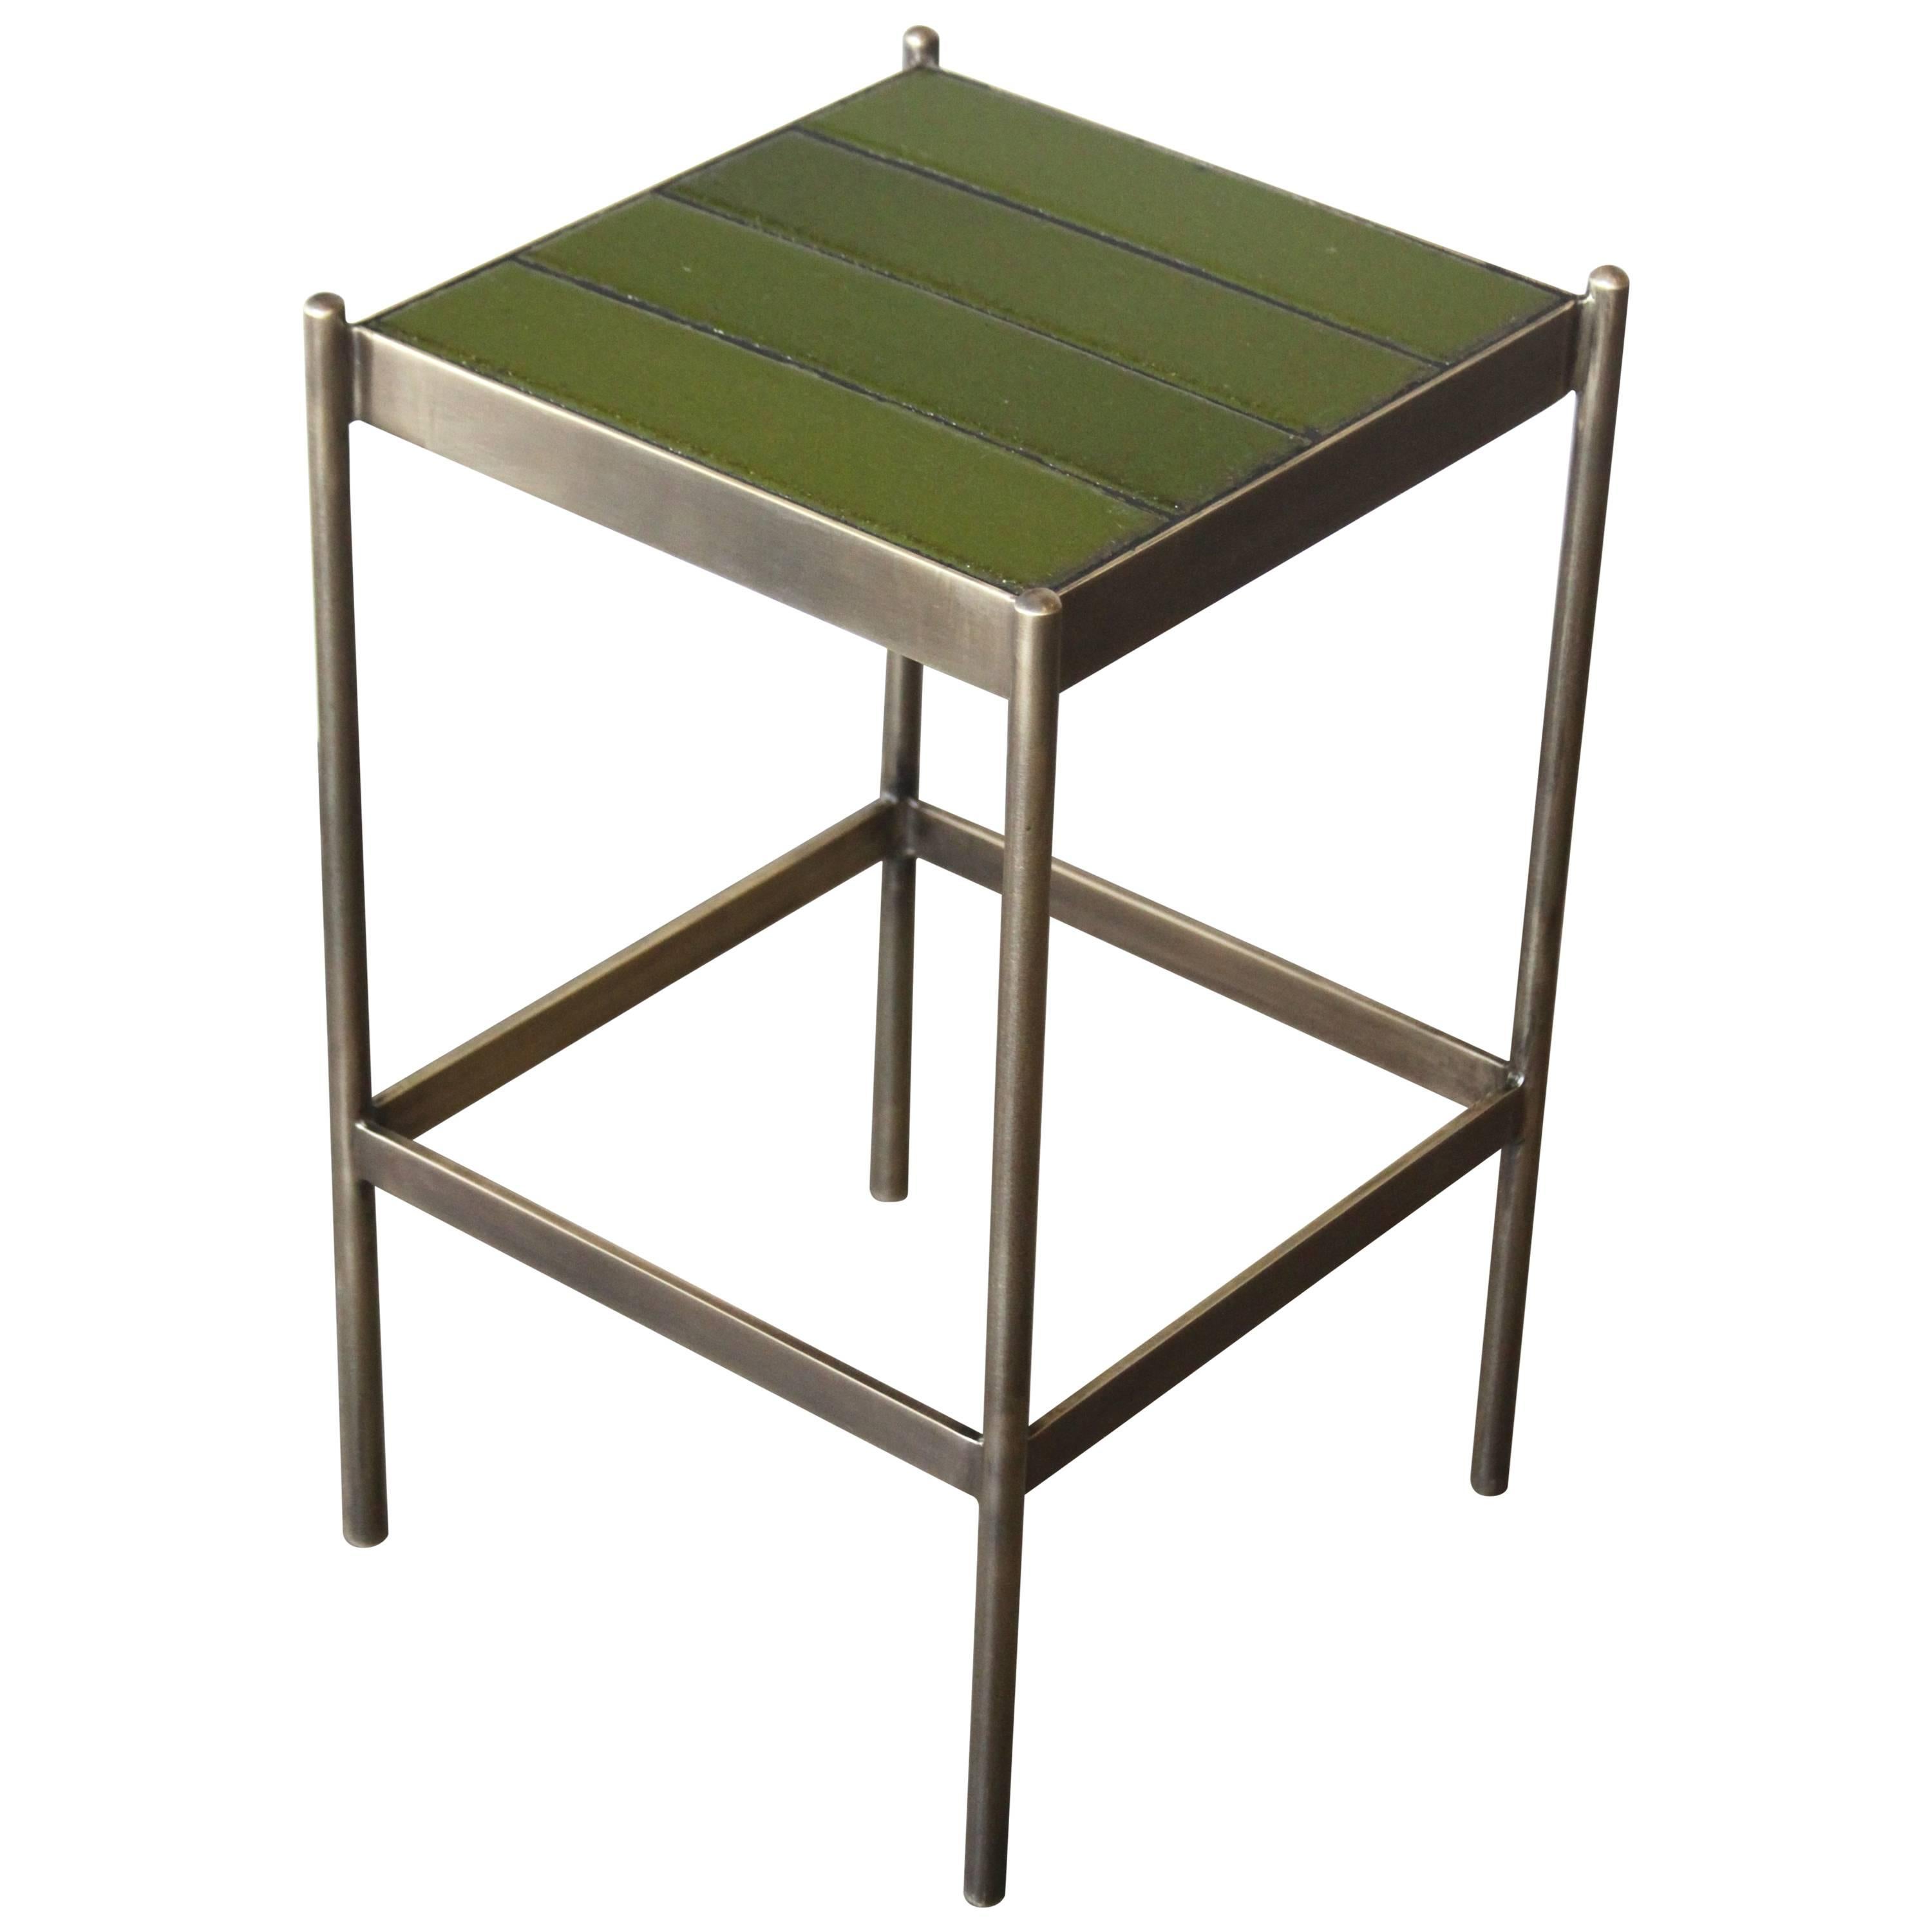 The Tile Side Table by Thomas Hayes Studio - Brass Frame For Sale